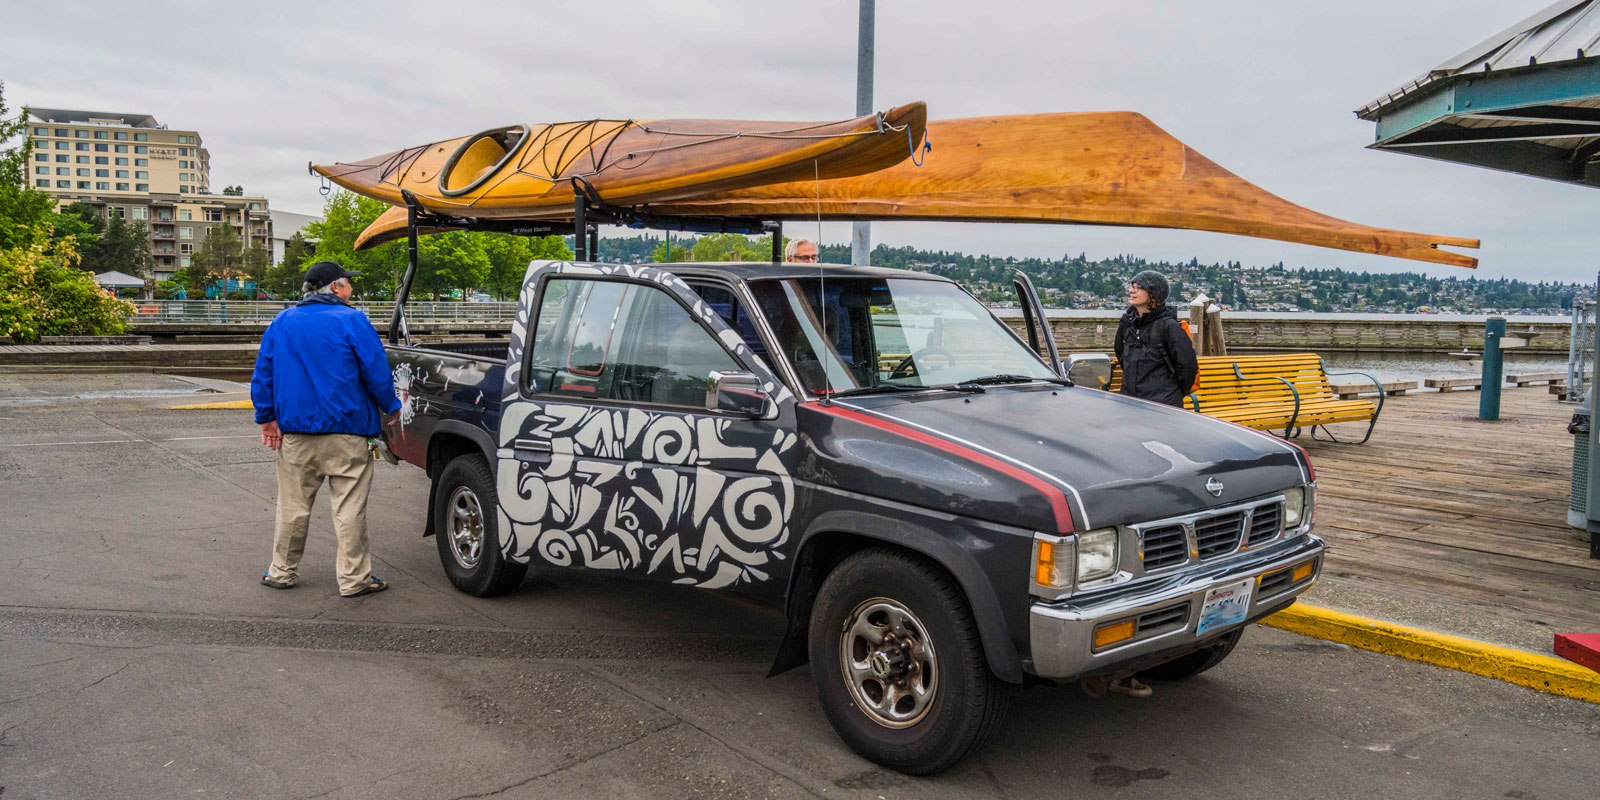 a kayak and the canoe on the top of a truck